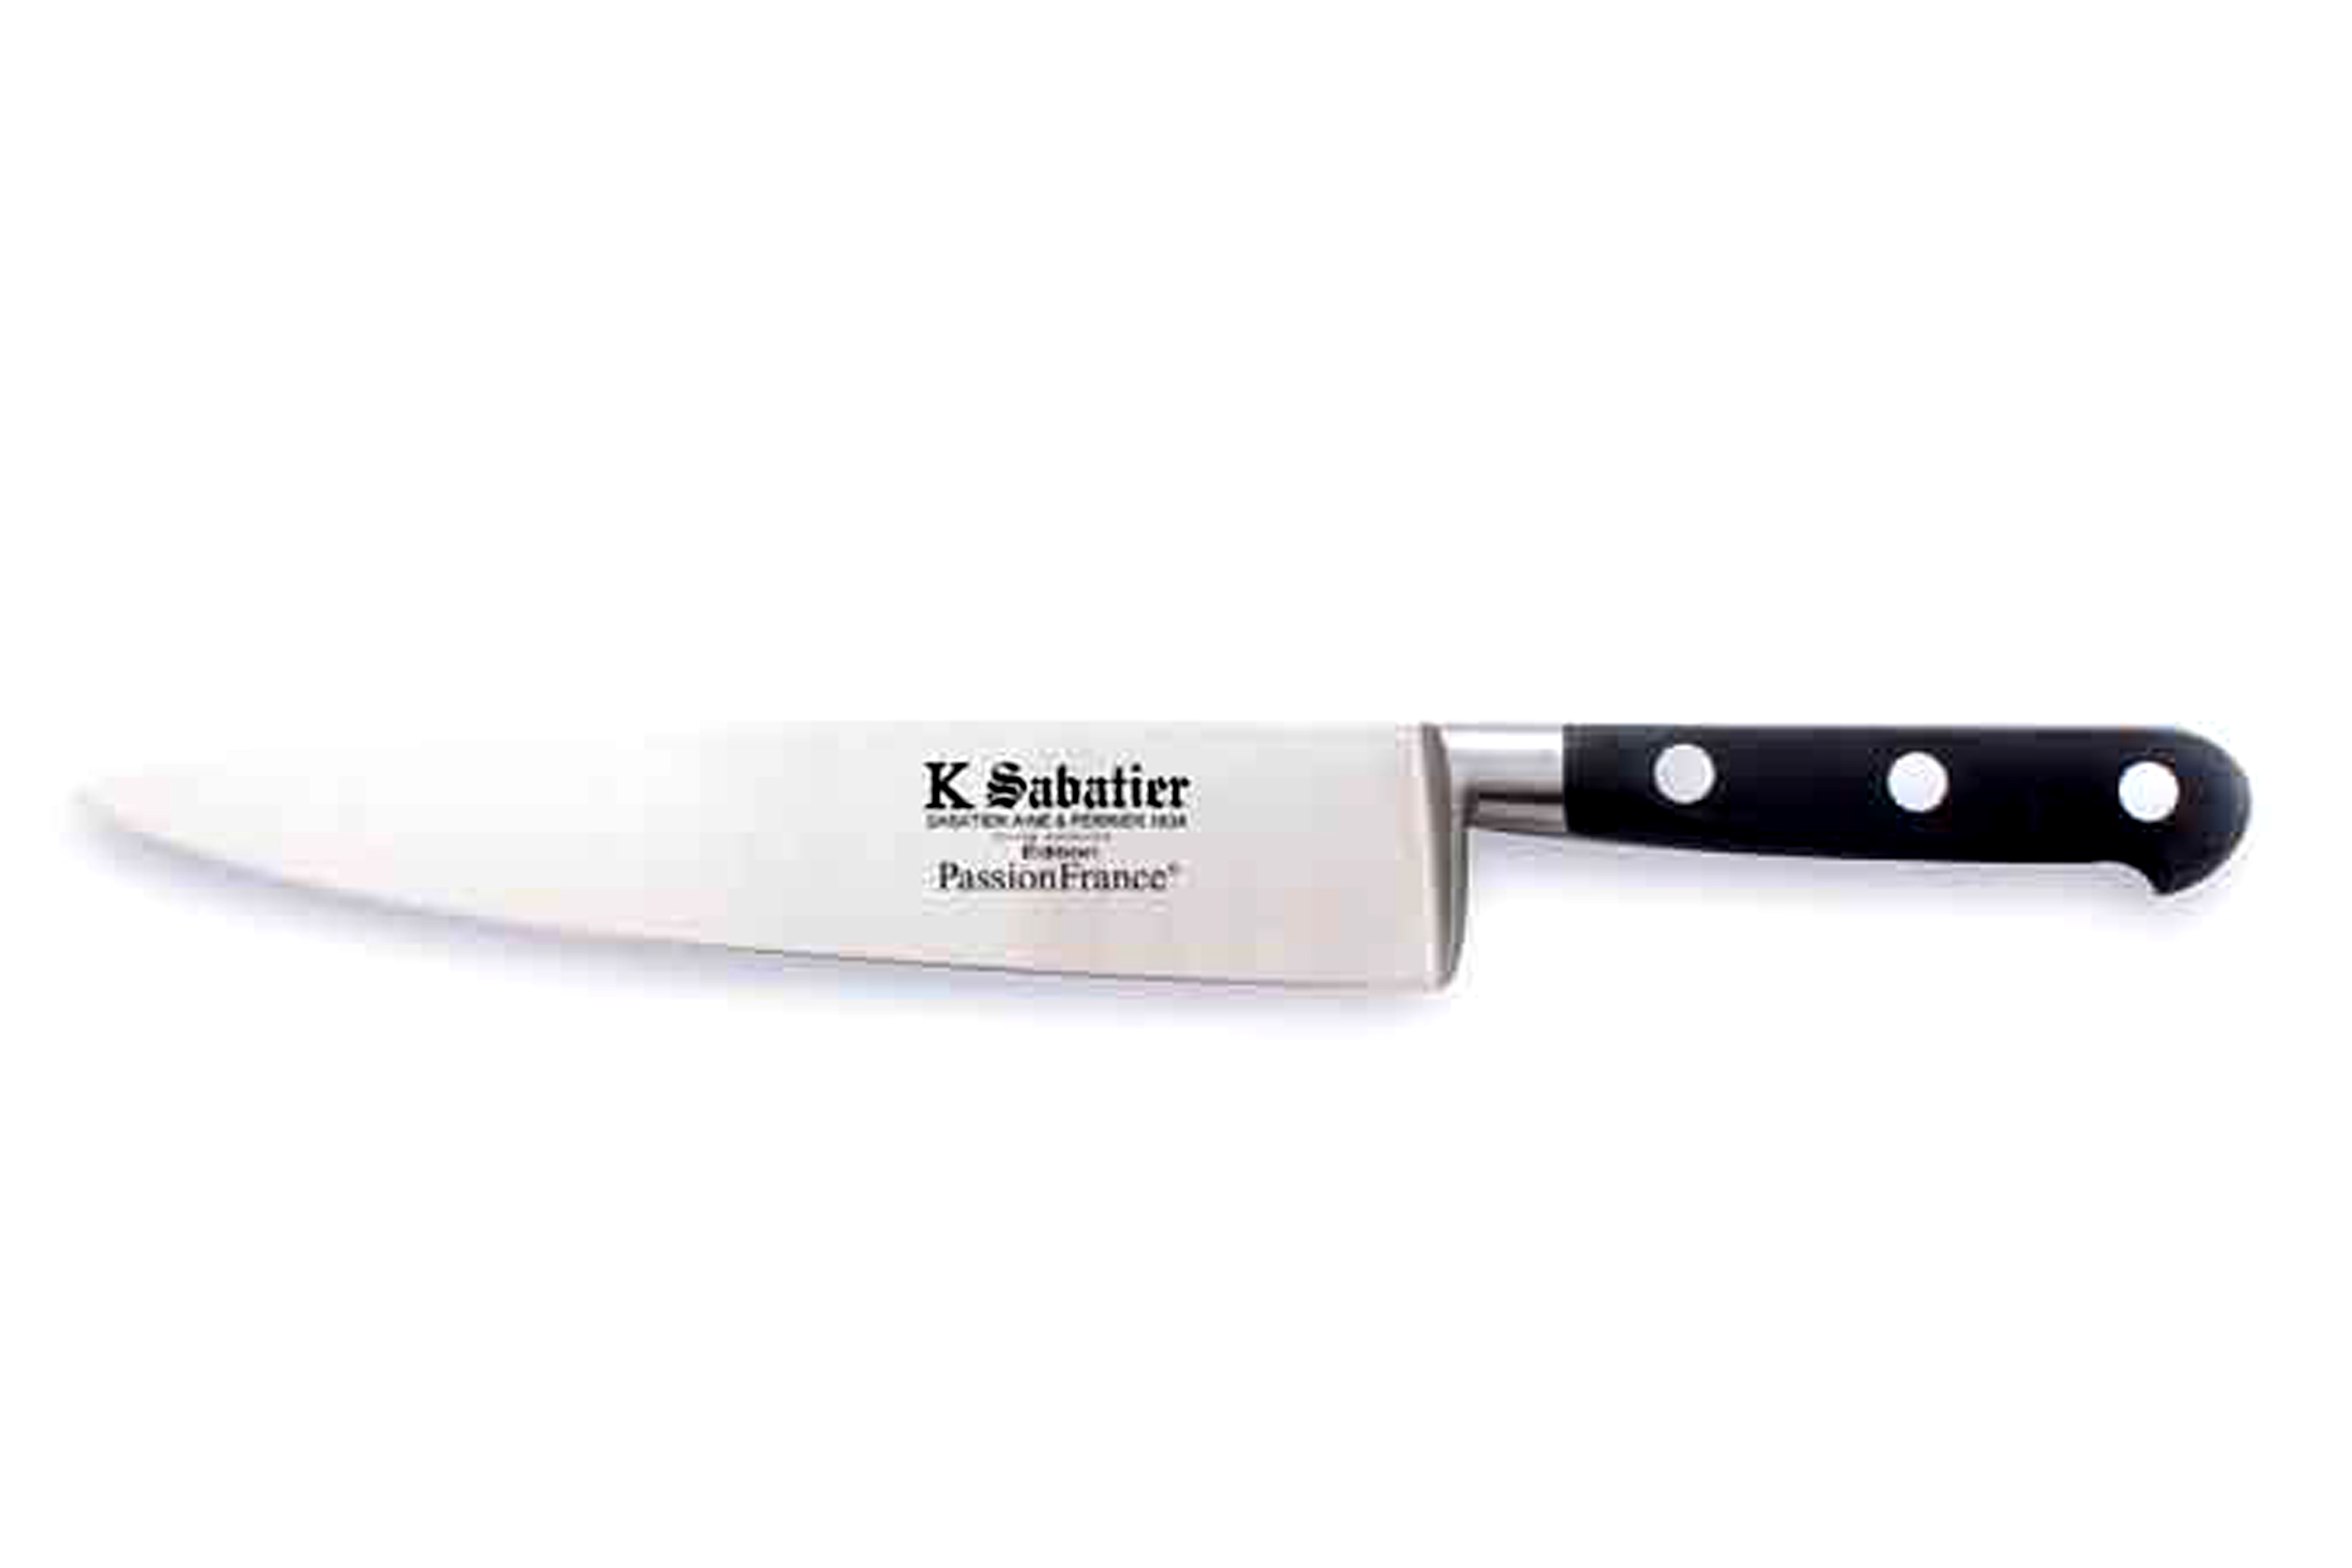 Series TRADITION blades carbon steel